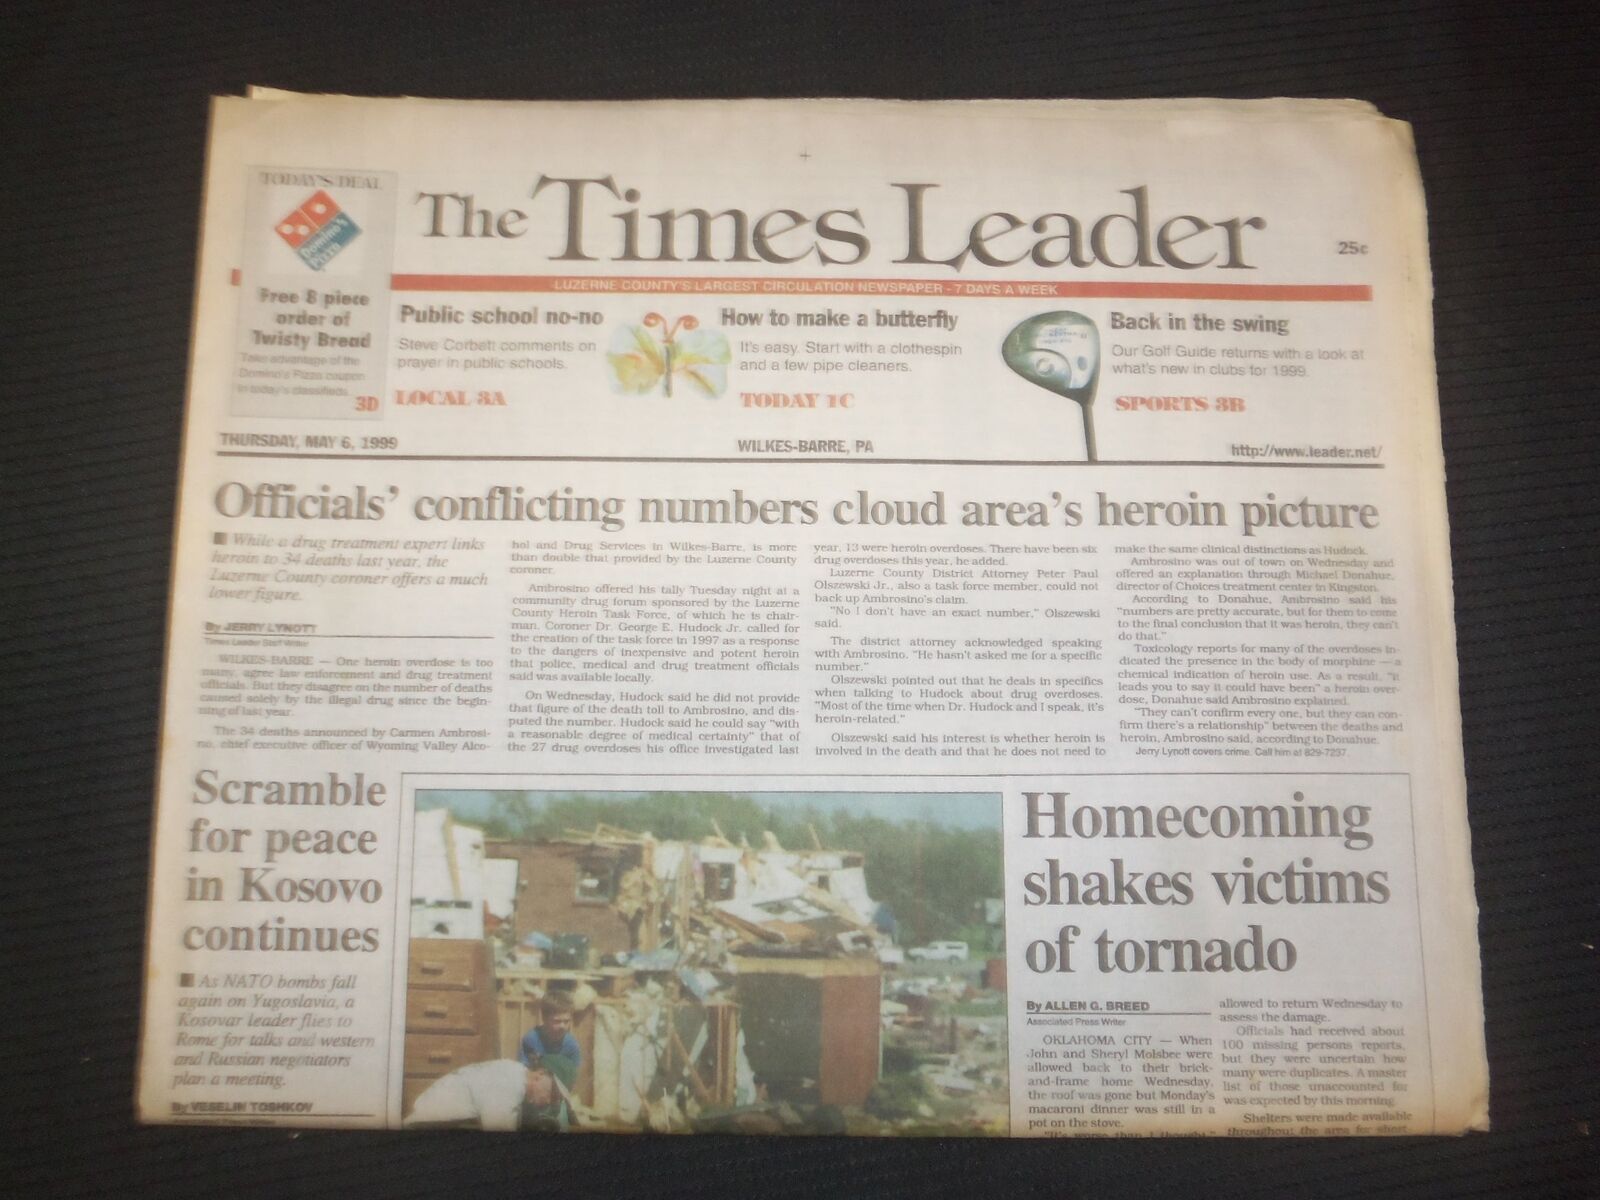 1999 MAY 6 WILKES-BARRE TIMES LEADER - SCRAMBLE FOR PEACE IN KOSOVO - NP 7465